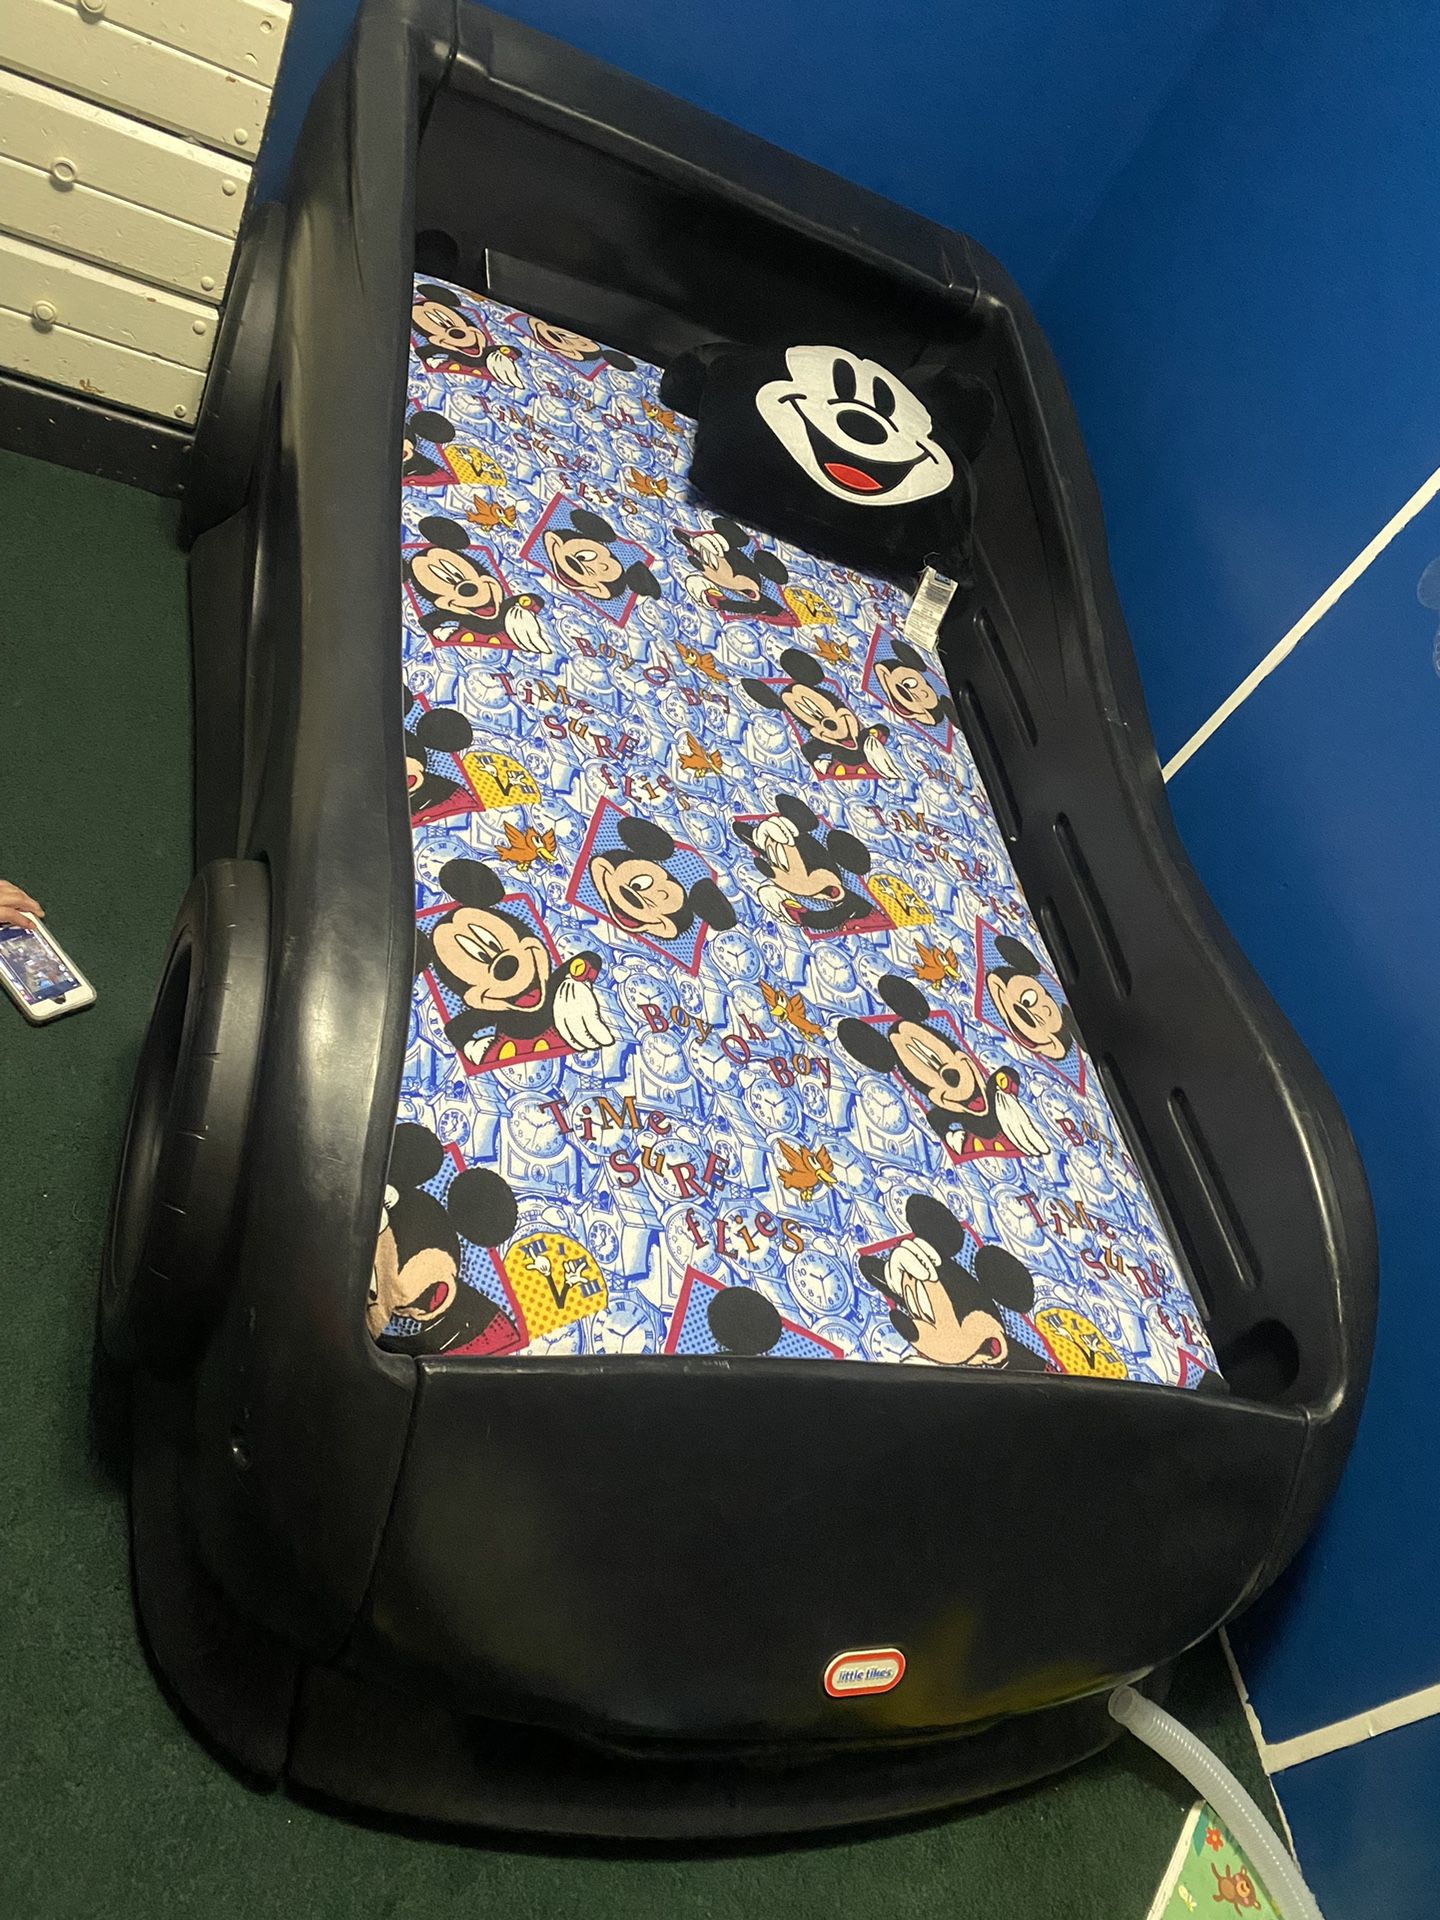 🚘🚘$$240-(firm price) gently used Twin size play car bed (gently used) FRAME ONLY MATTRESS NOT INCLUDED!!! Colorful wood frame (has car designs) is i